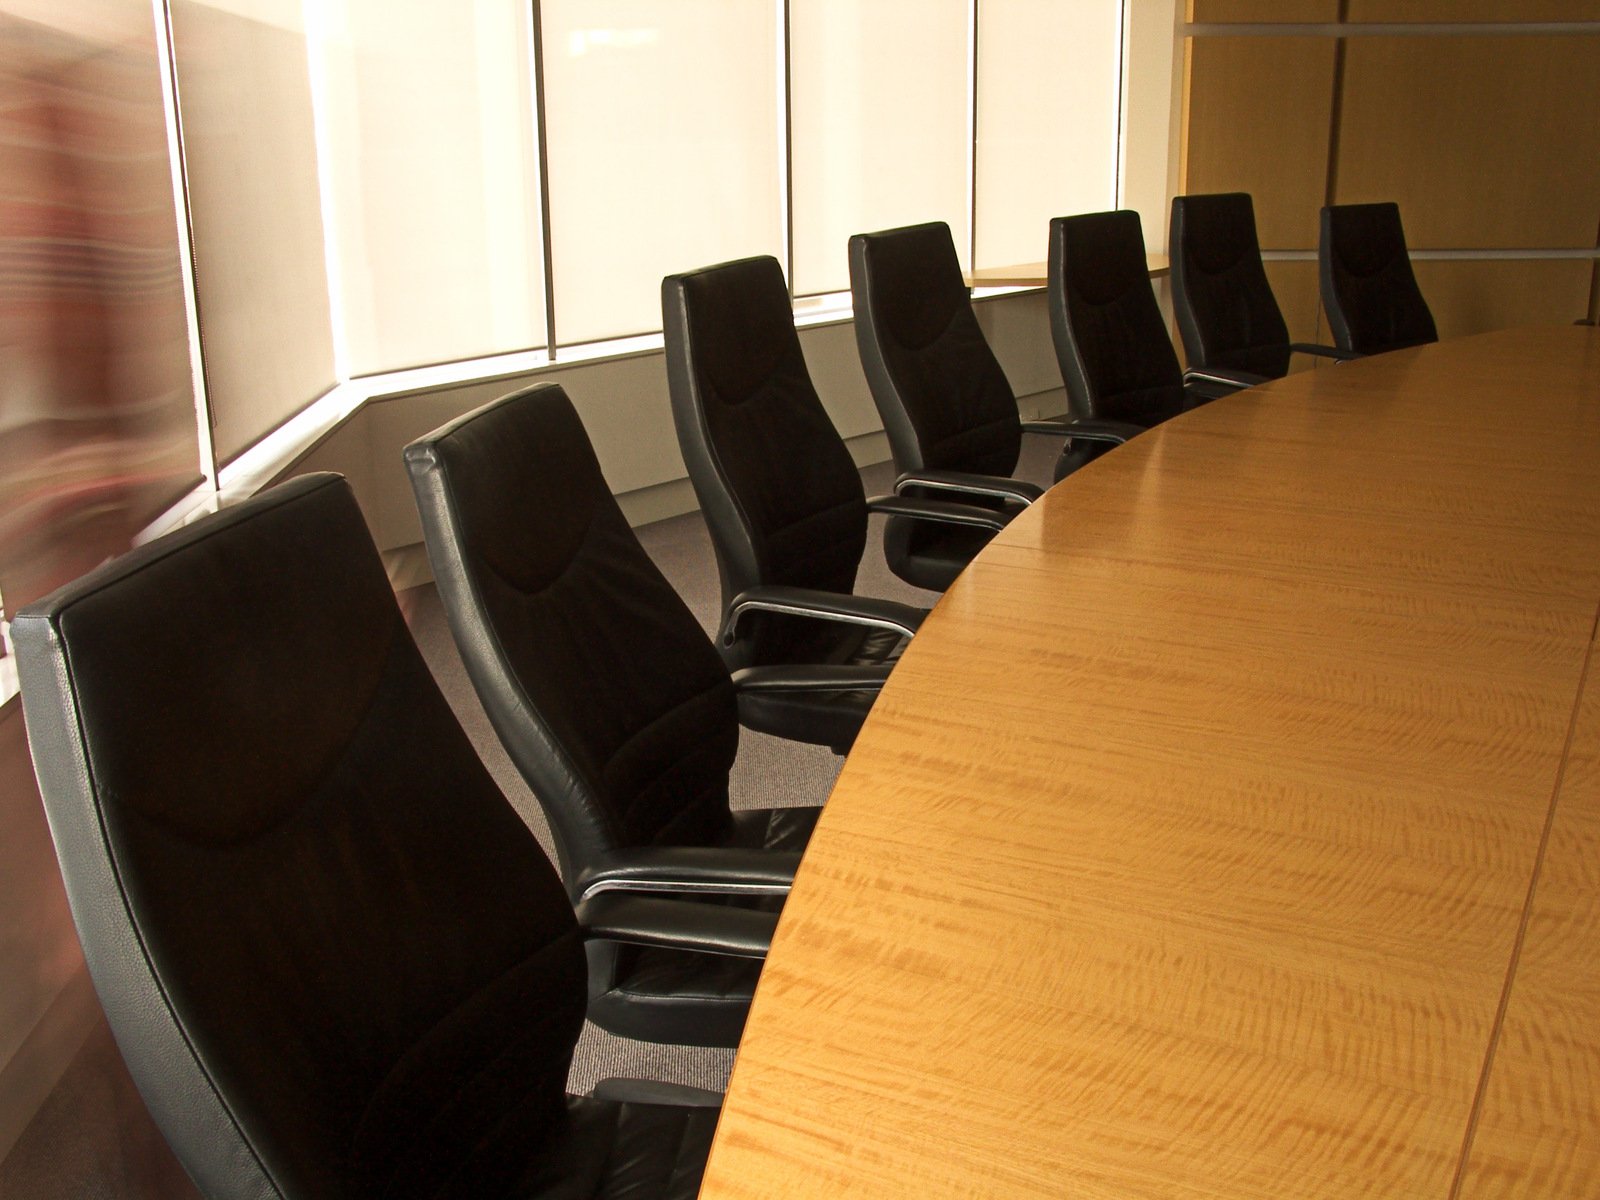 the office conference table has black chairs